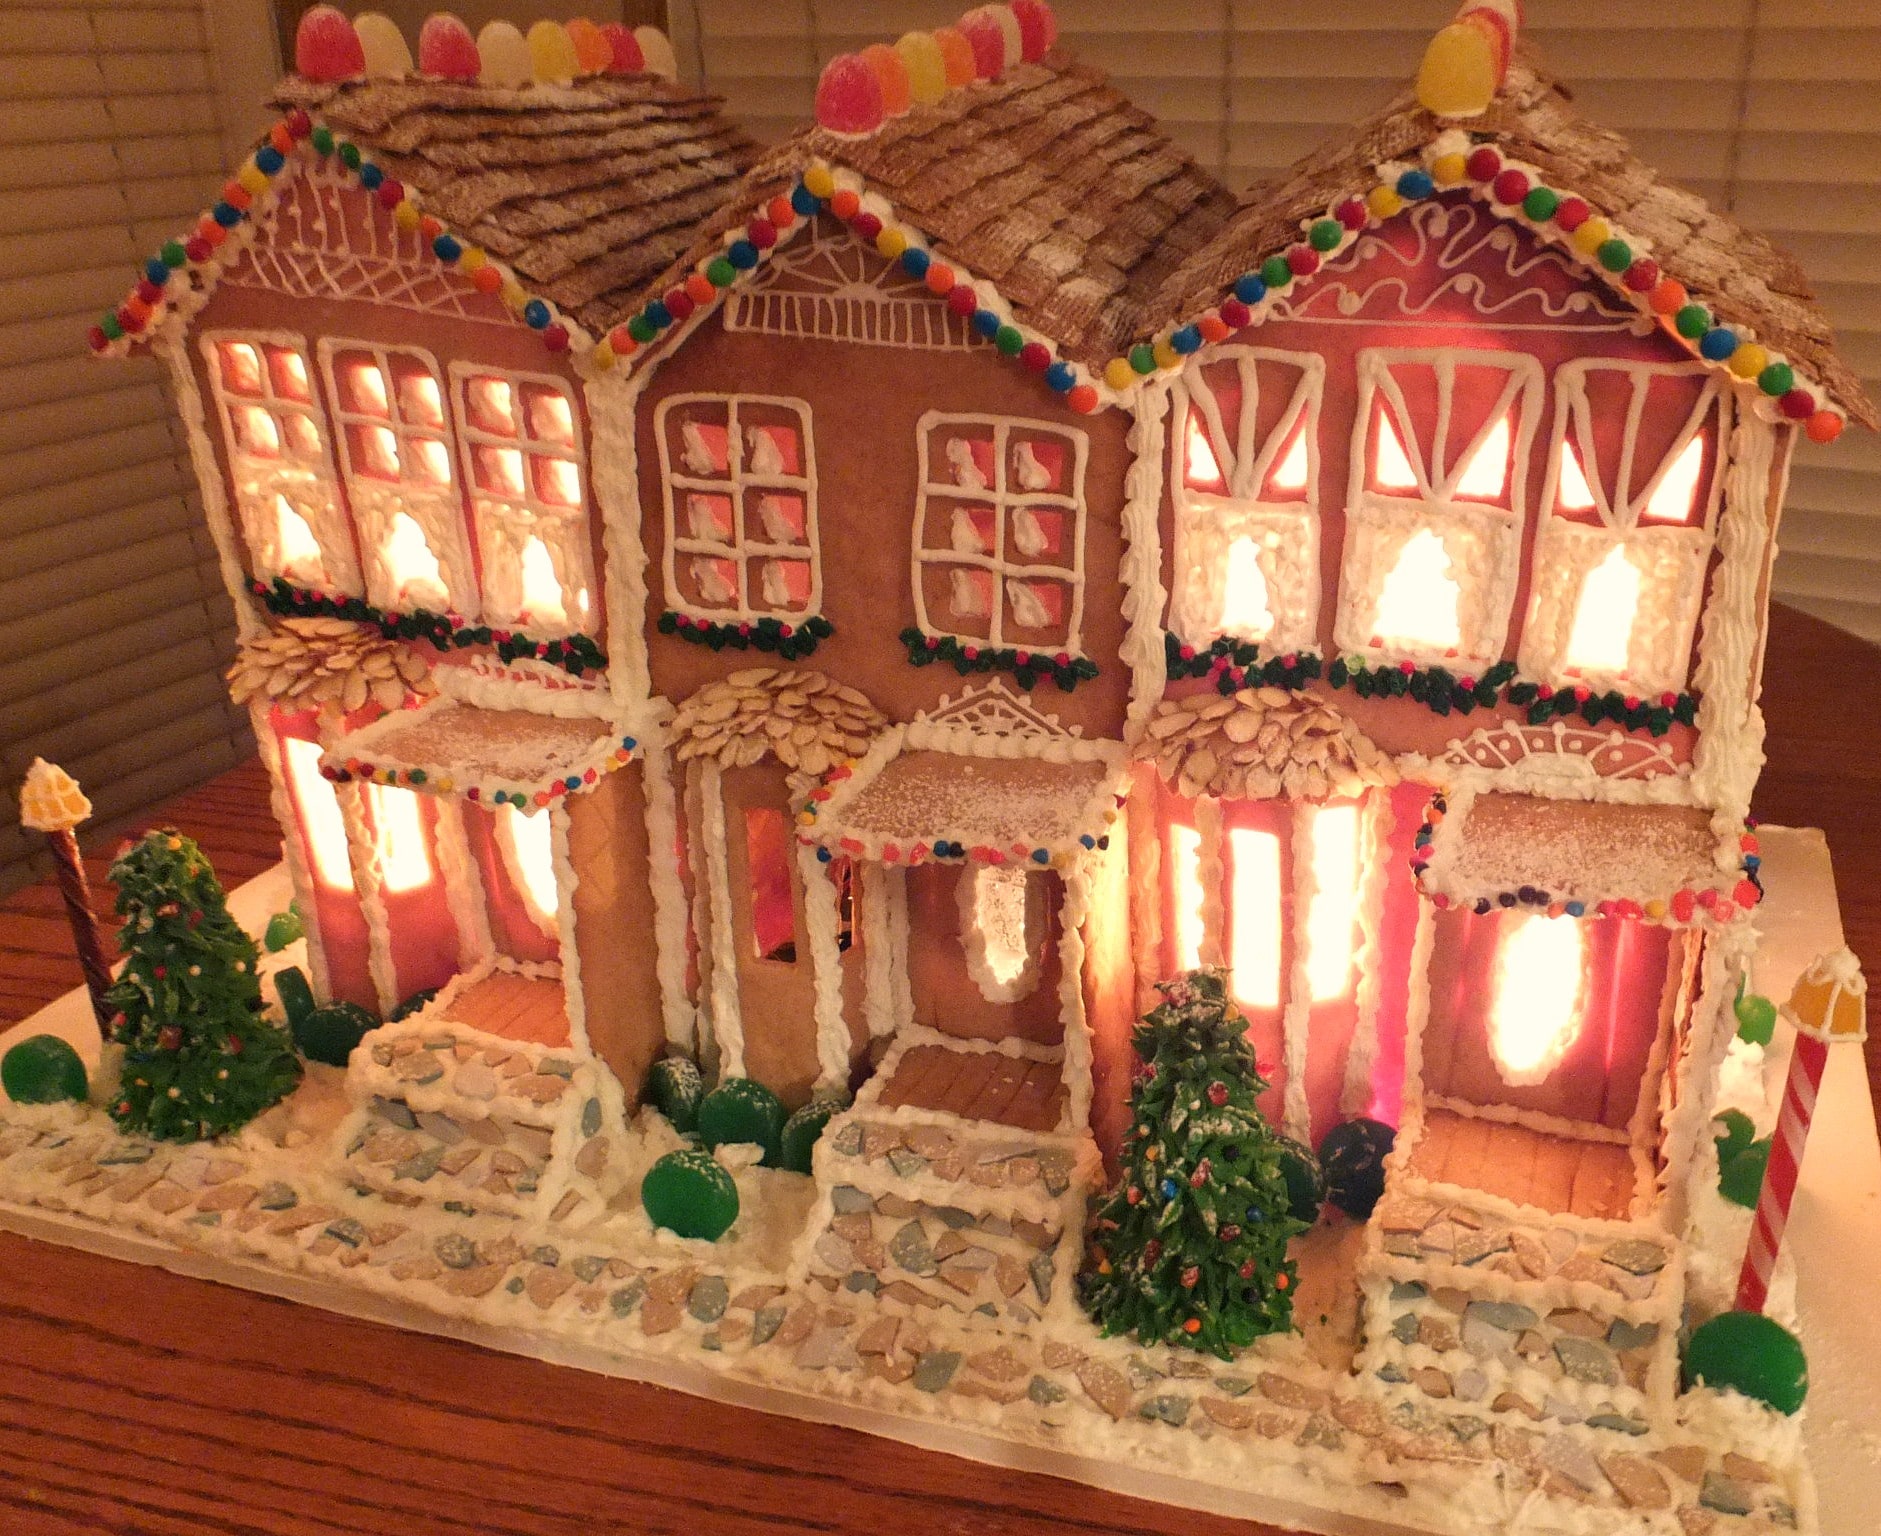 Top 10 tips for building a large gingerbread house - Food Meanderings